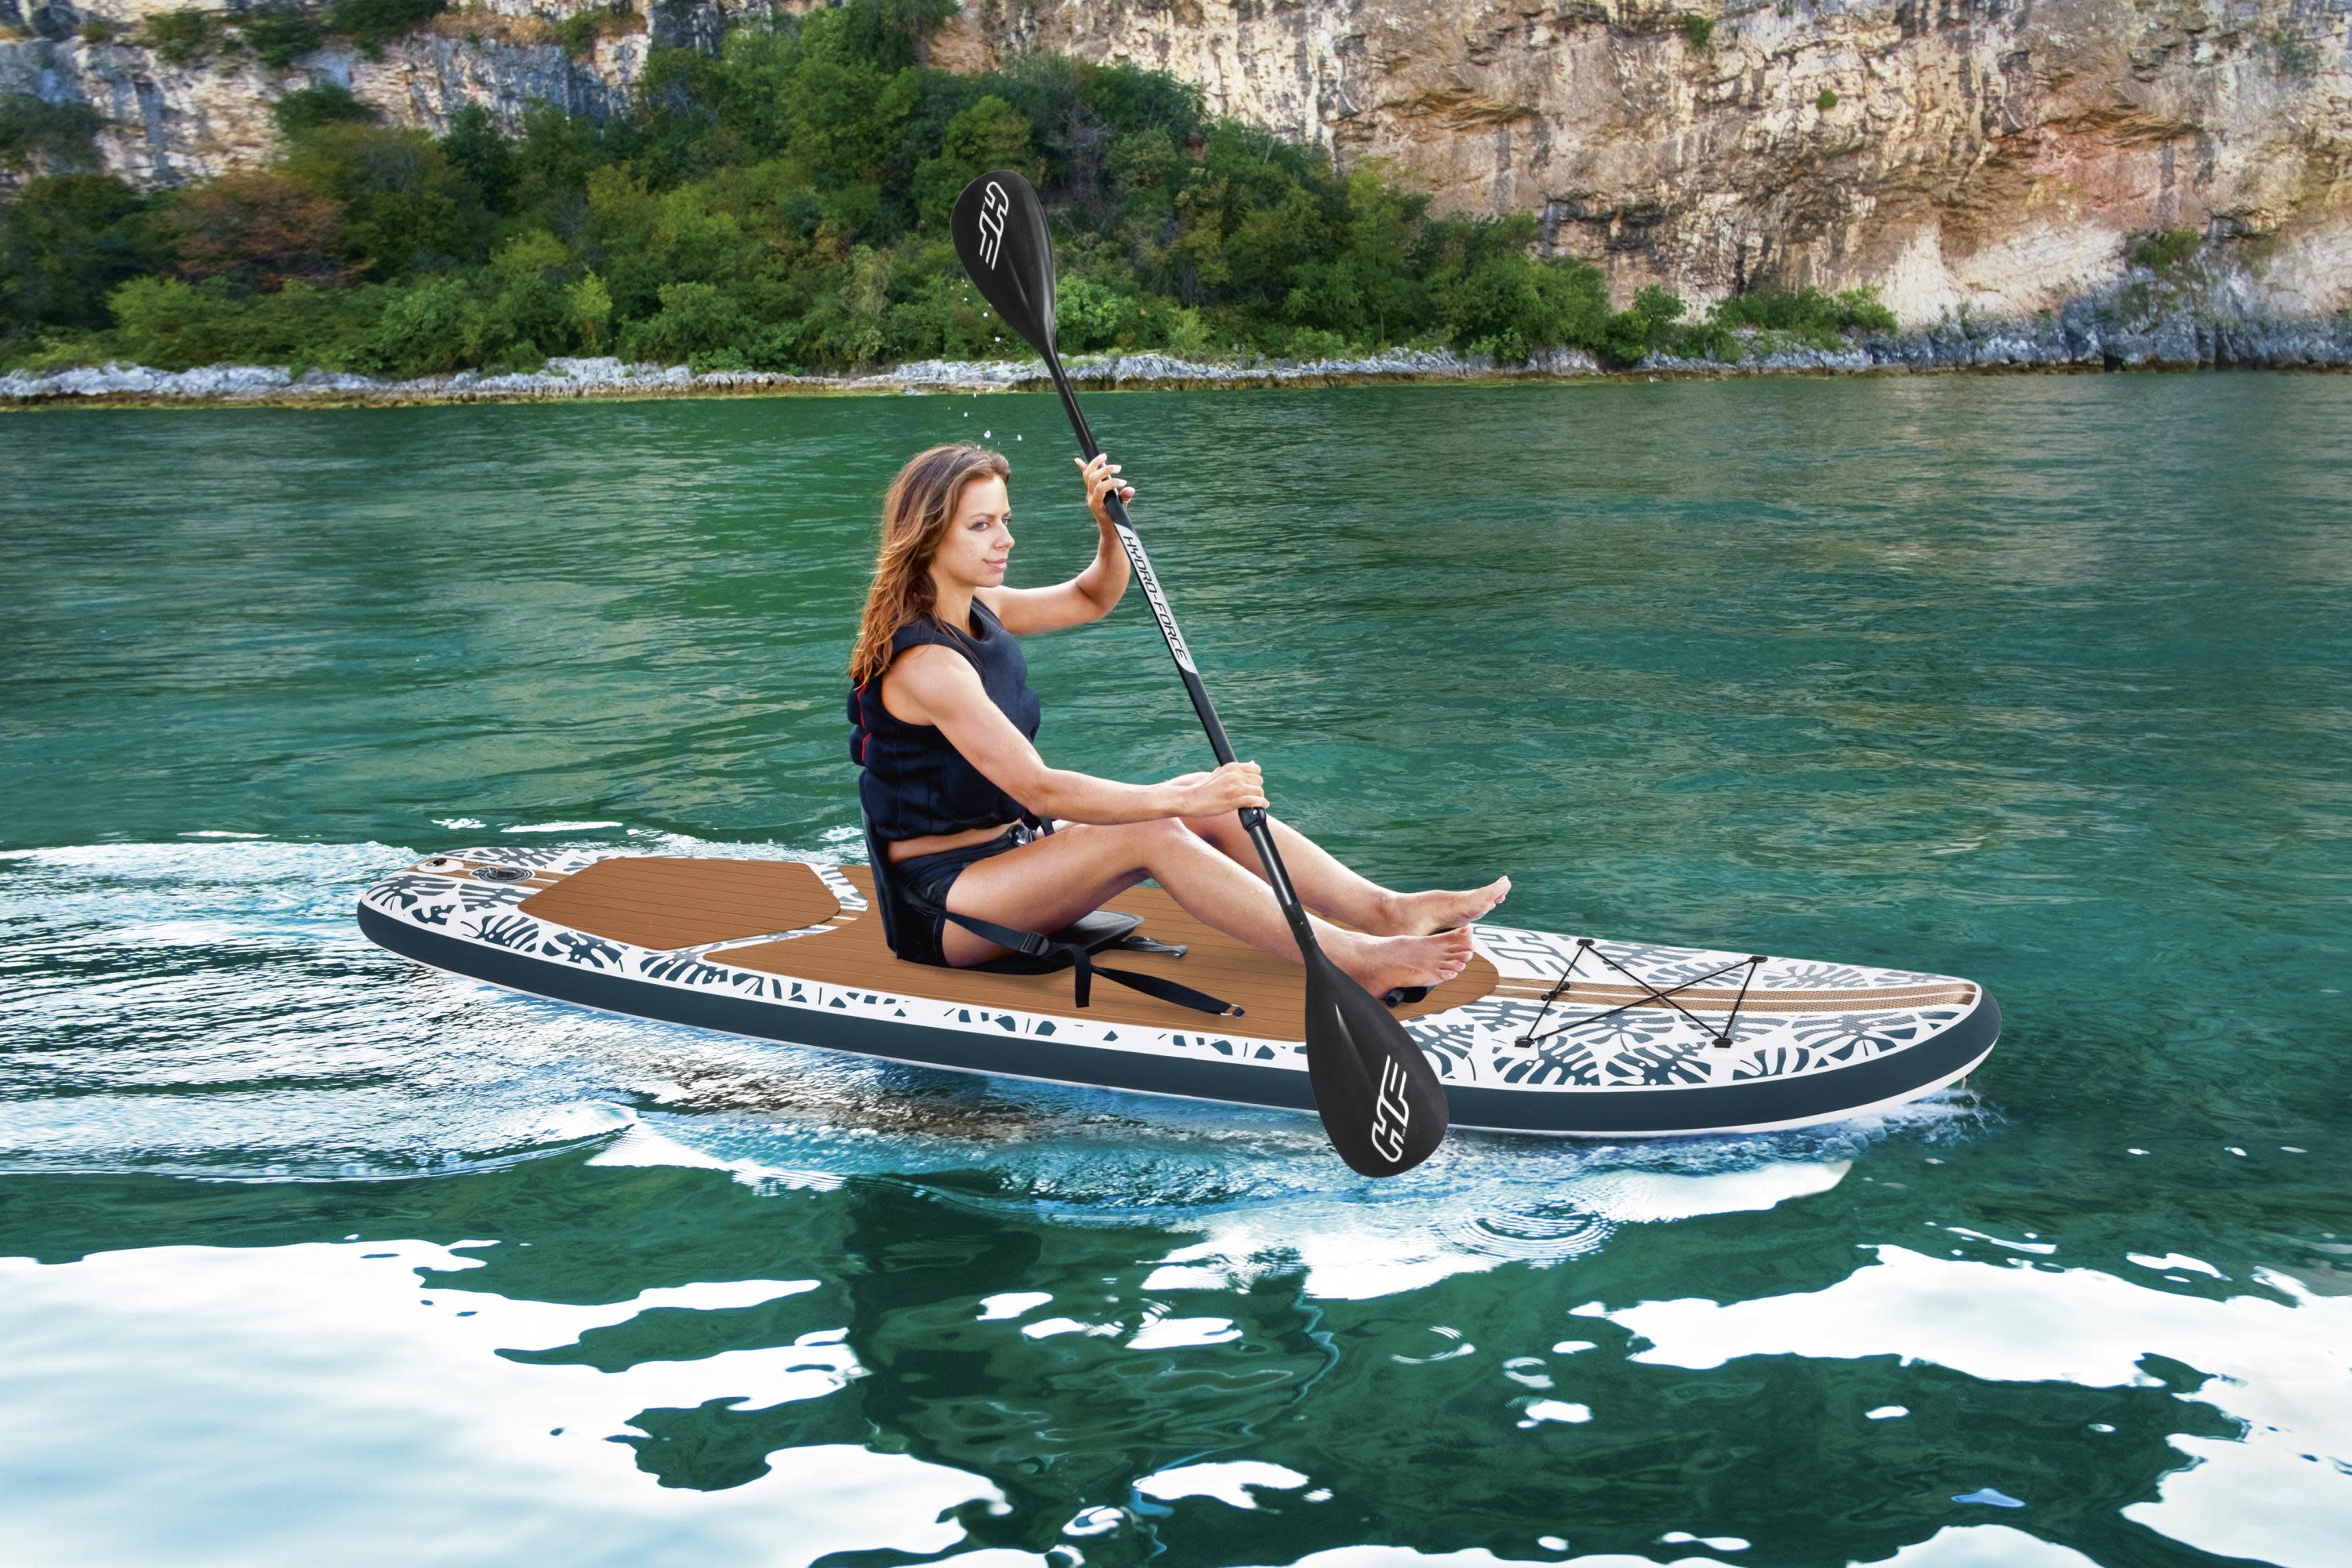 Hydro-Force Oceana 10 Ft. Inflatable Convertible Stand-up Paddle Board and Sit-on Kayak Set, Wood and Palm Print - image 3 of 10